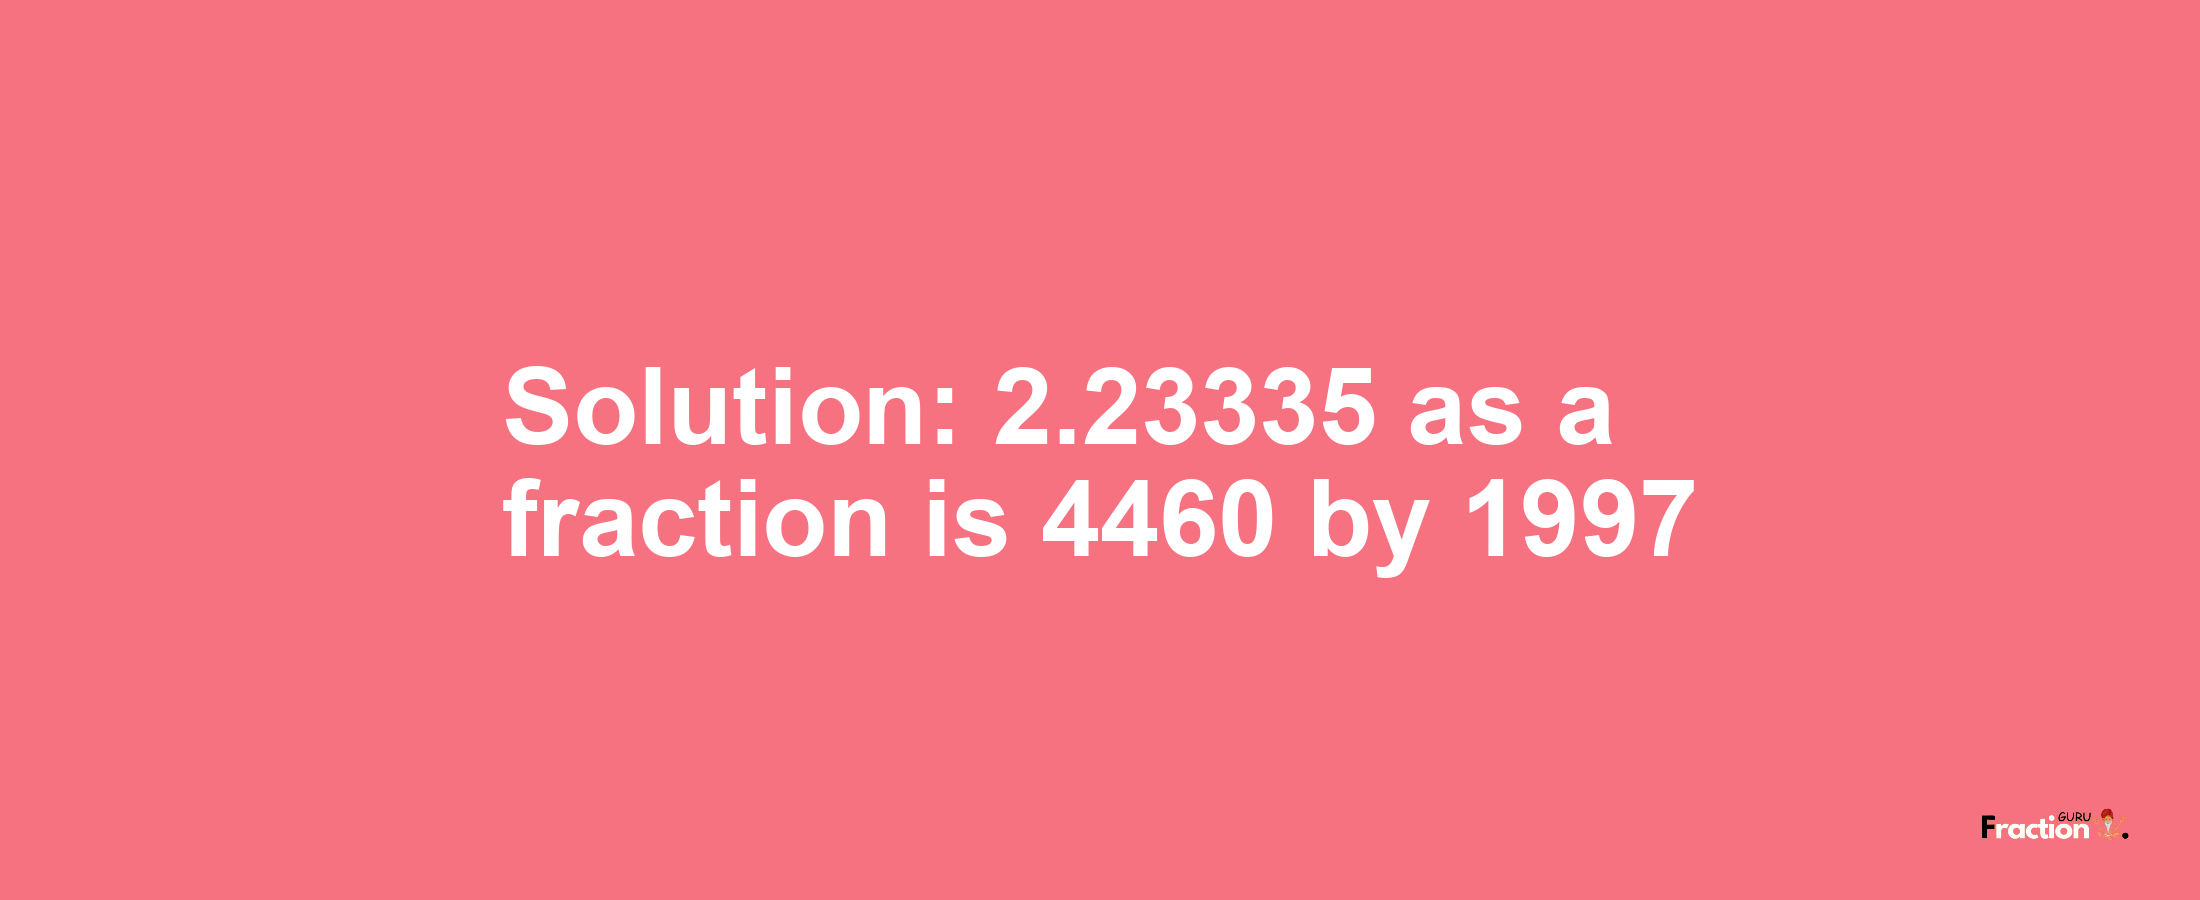 Solution:2.23335 as a fraction is 4460/1997